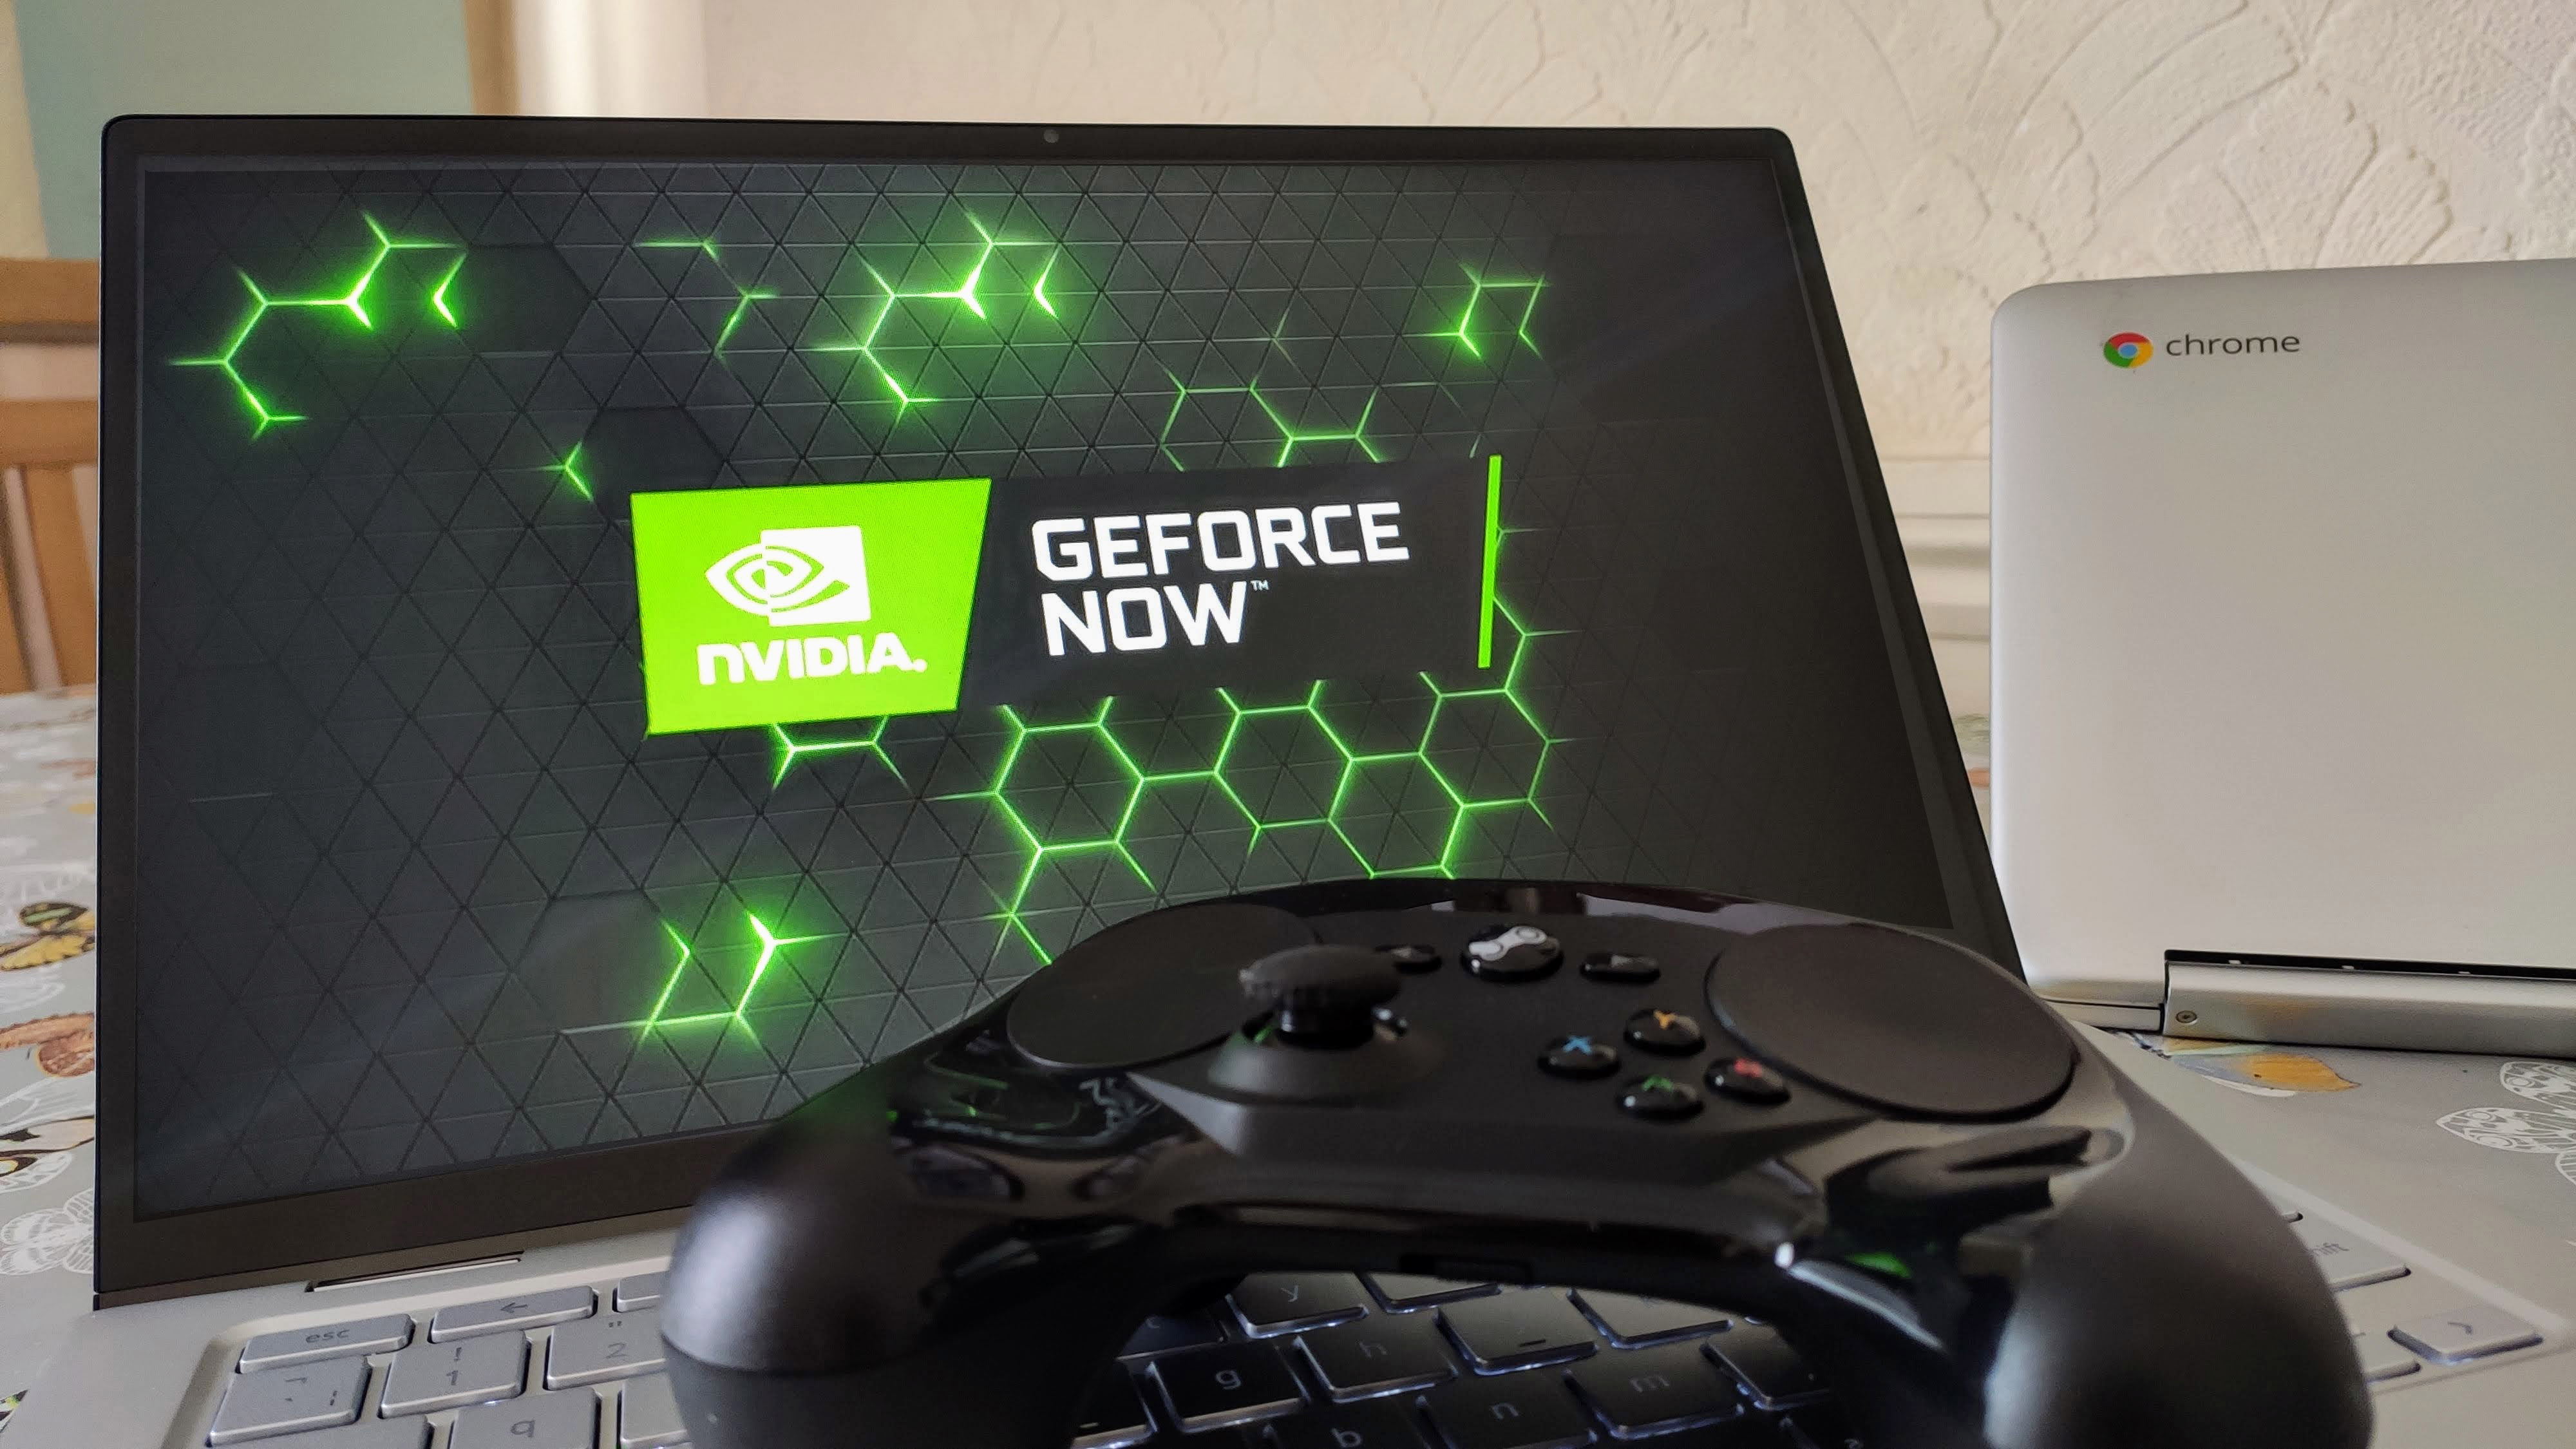 Play games for free on your Chromebook with GeForce Now